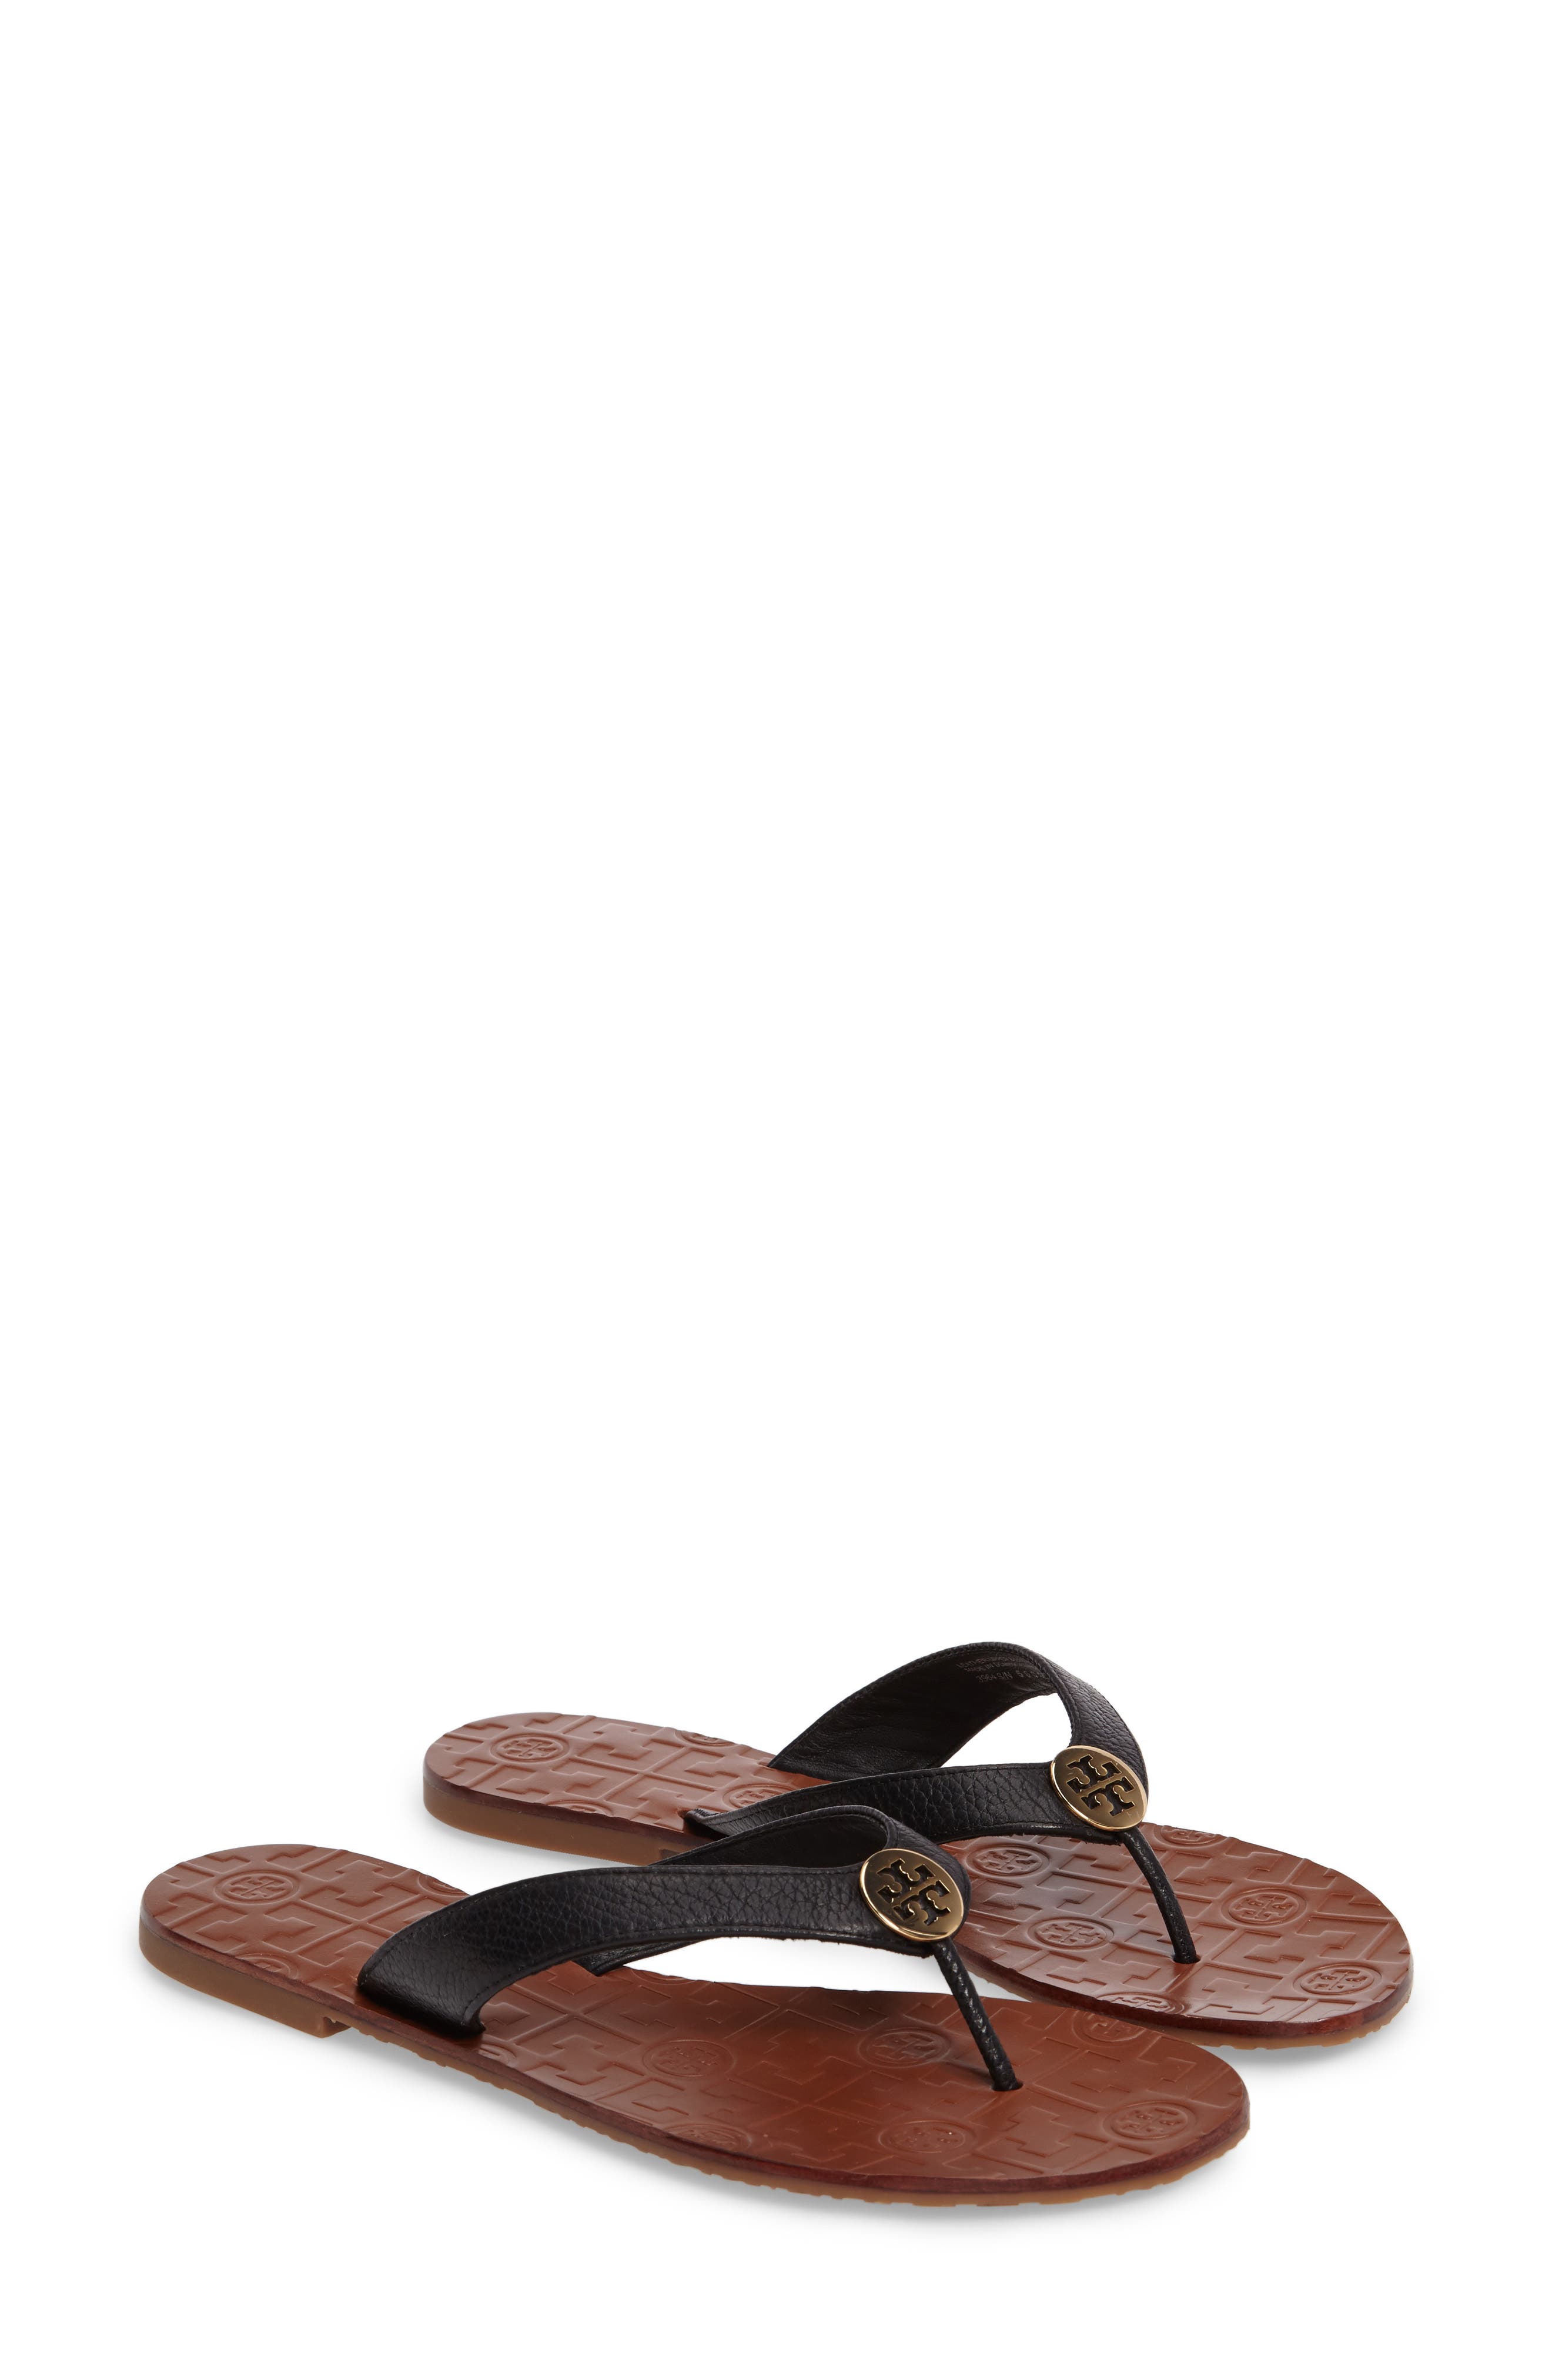 tory burch leather sandals